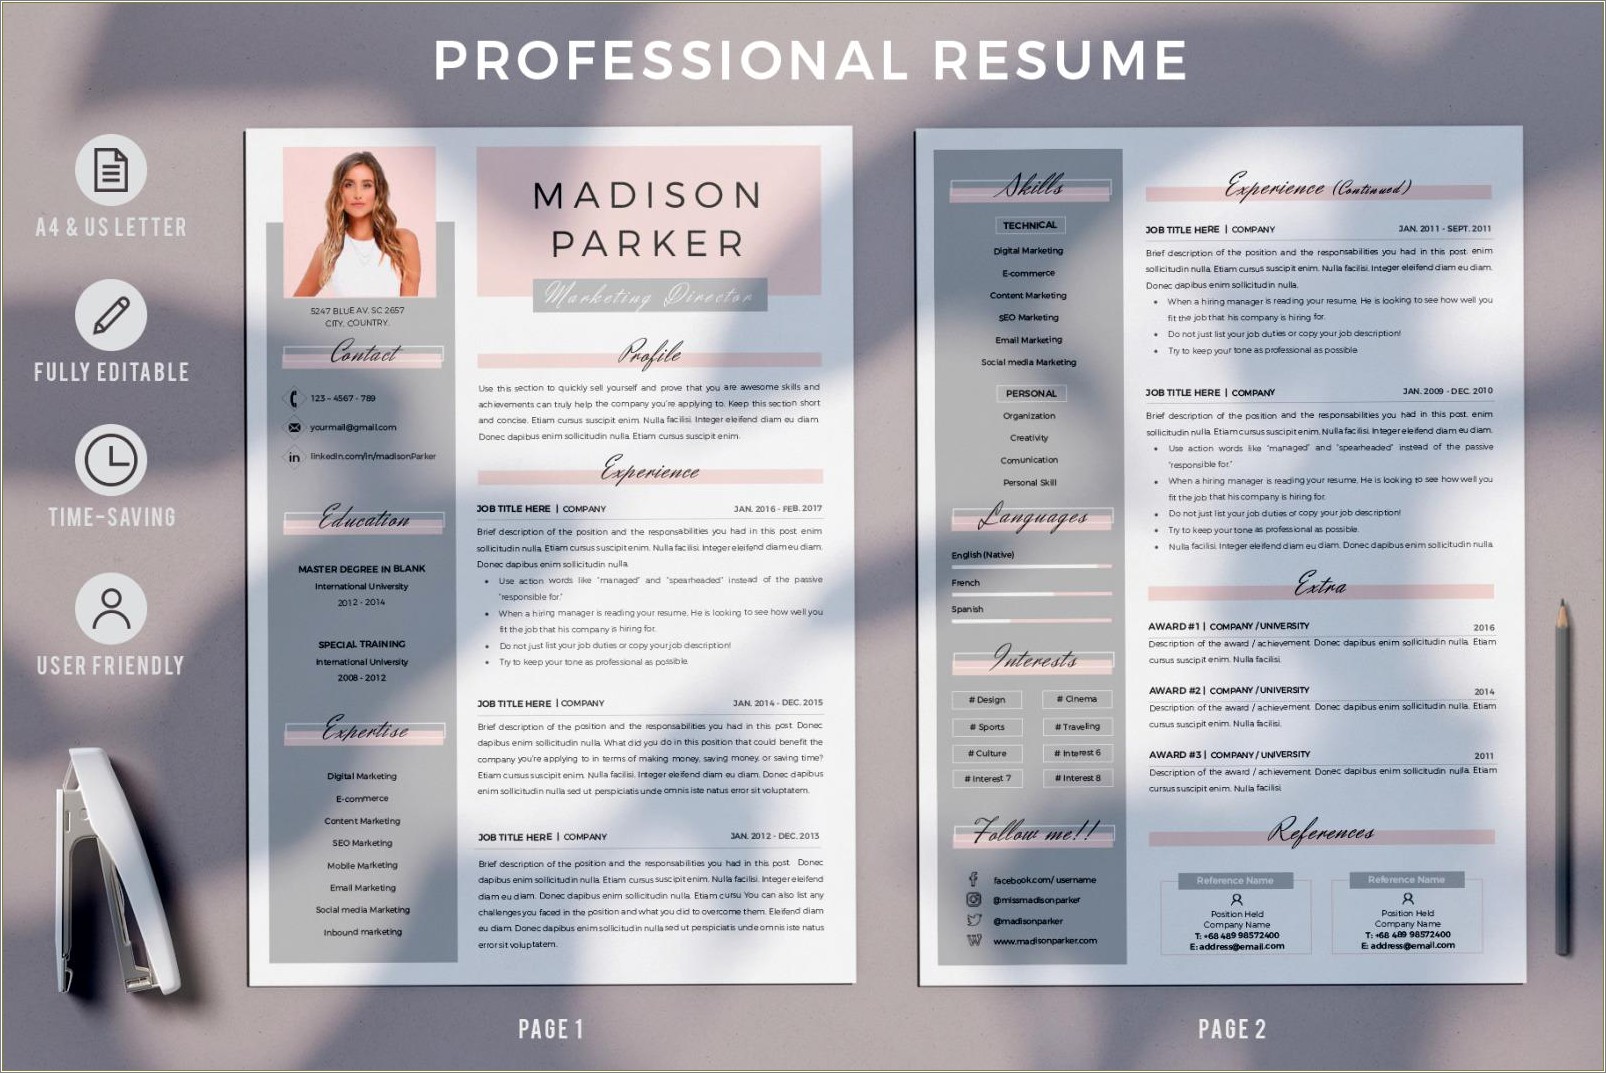 Advantages Of Creating A Resume In Ms Word